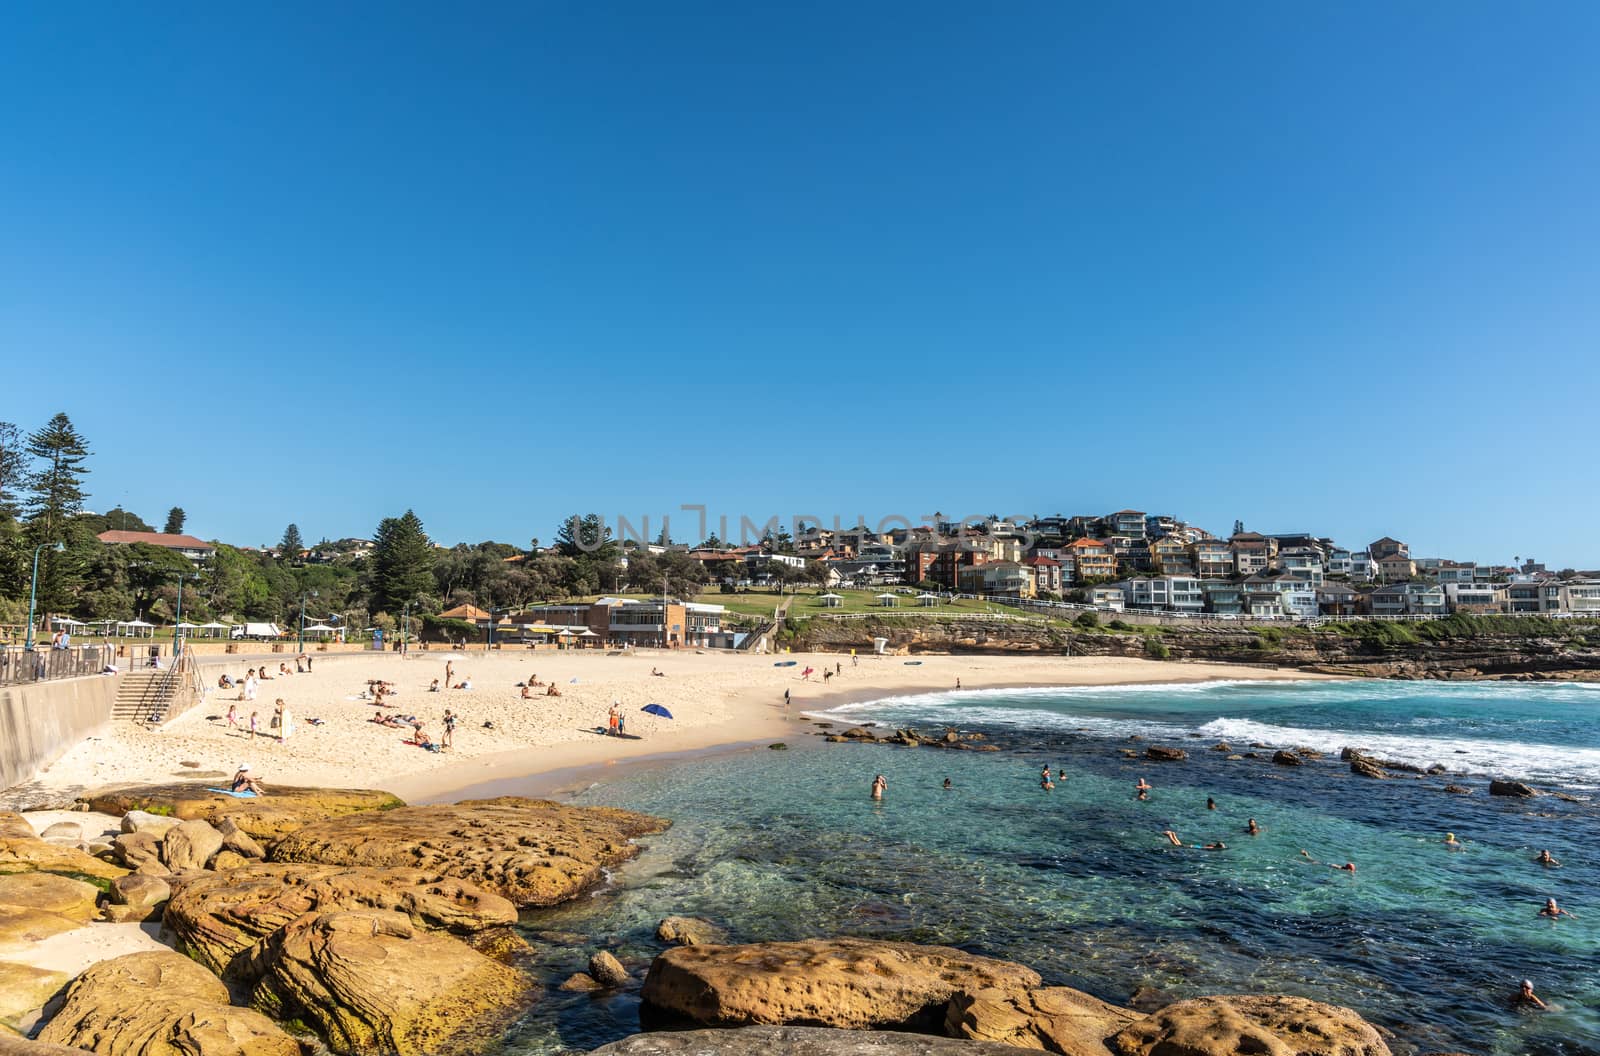 Sydney, Australia - February 11, 2019: Bronte Beach, sea water, yellow sand, green park under blue sky, seen from South cliff. Band with housing on horizon. Brown rocks in foreground. People active.